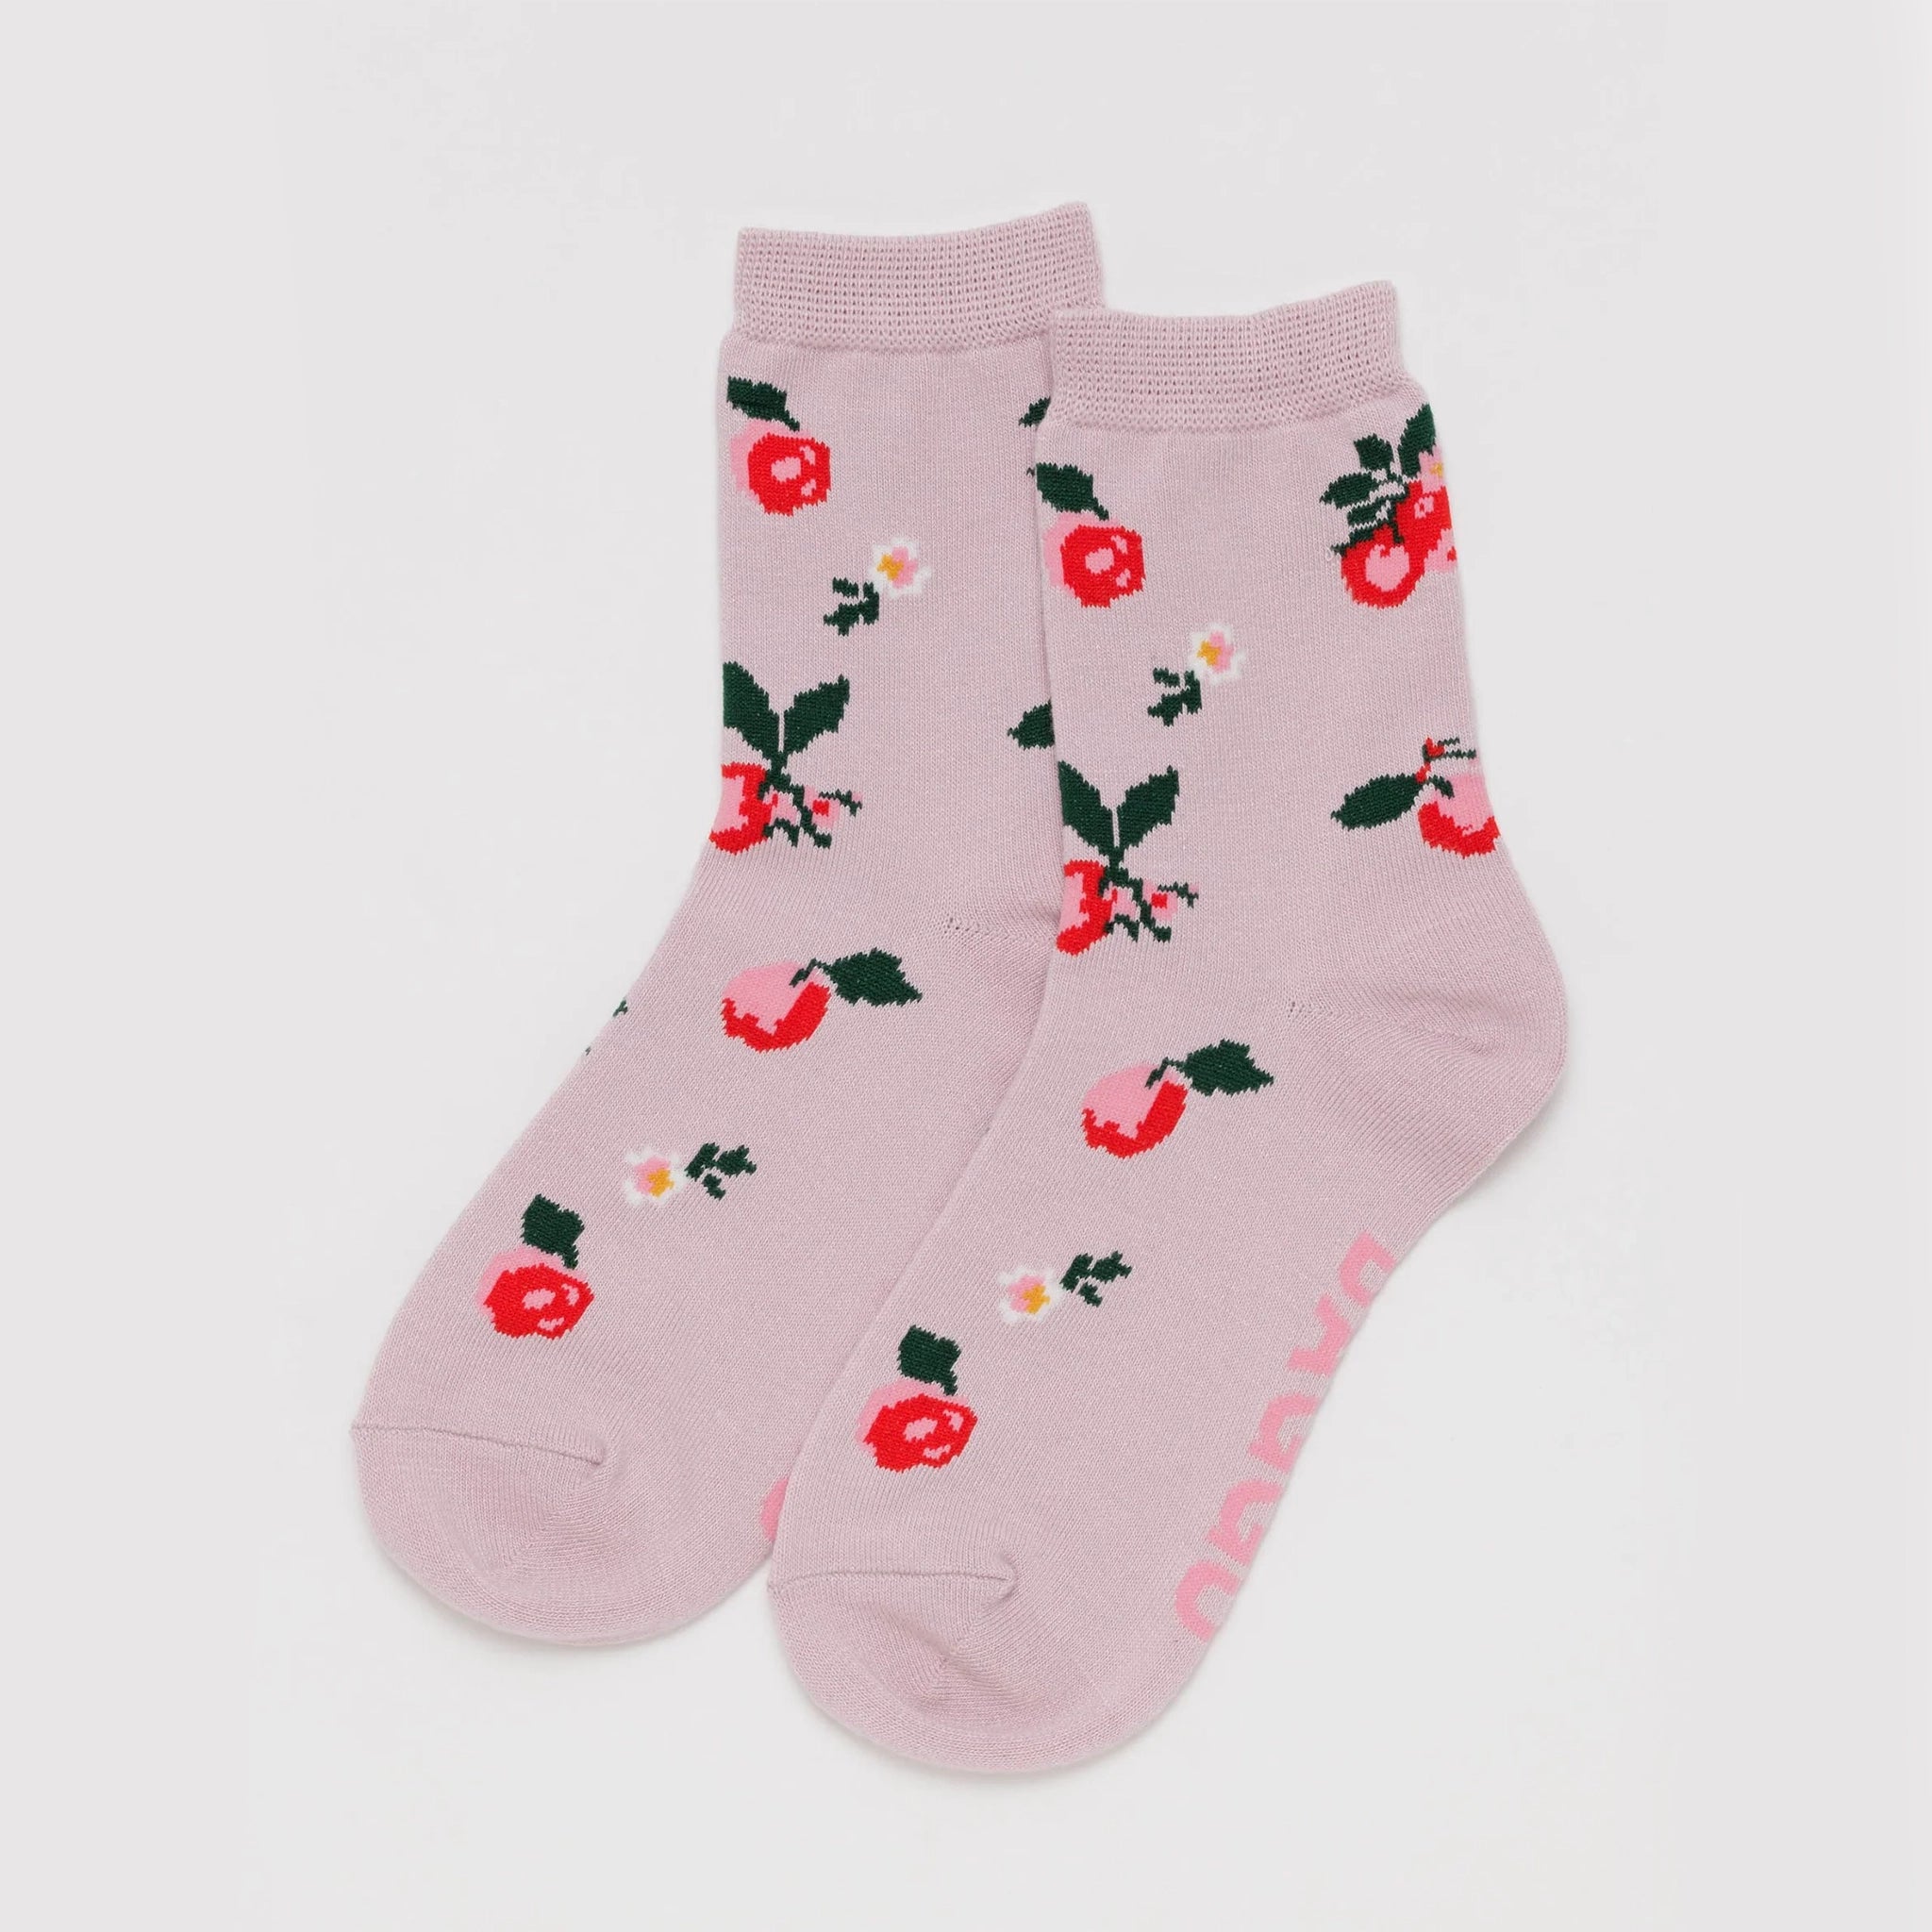 On a white background is a light pink pair of socks with an apple design. 